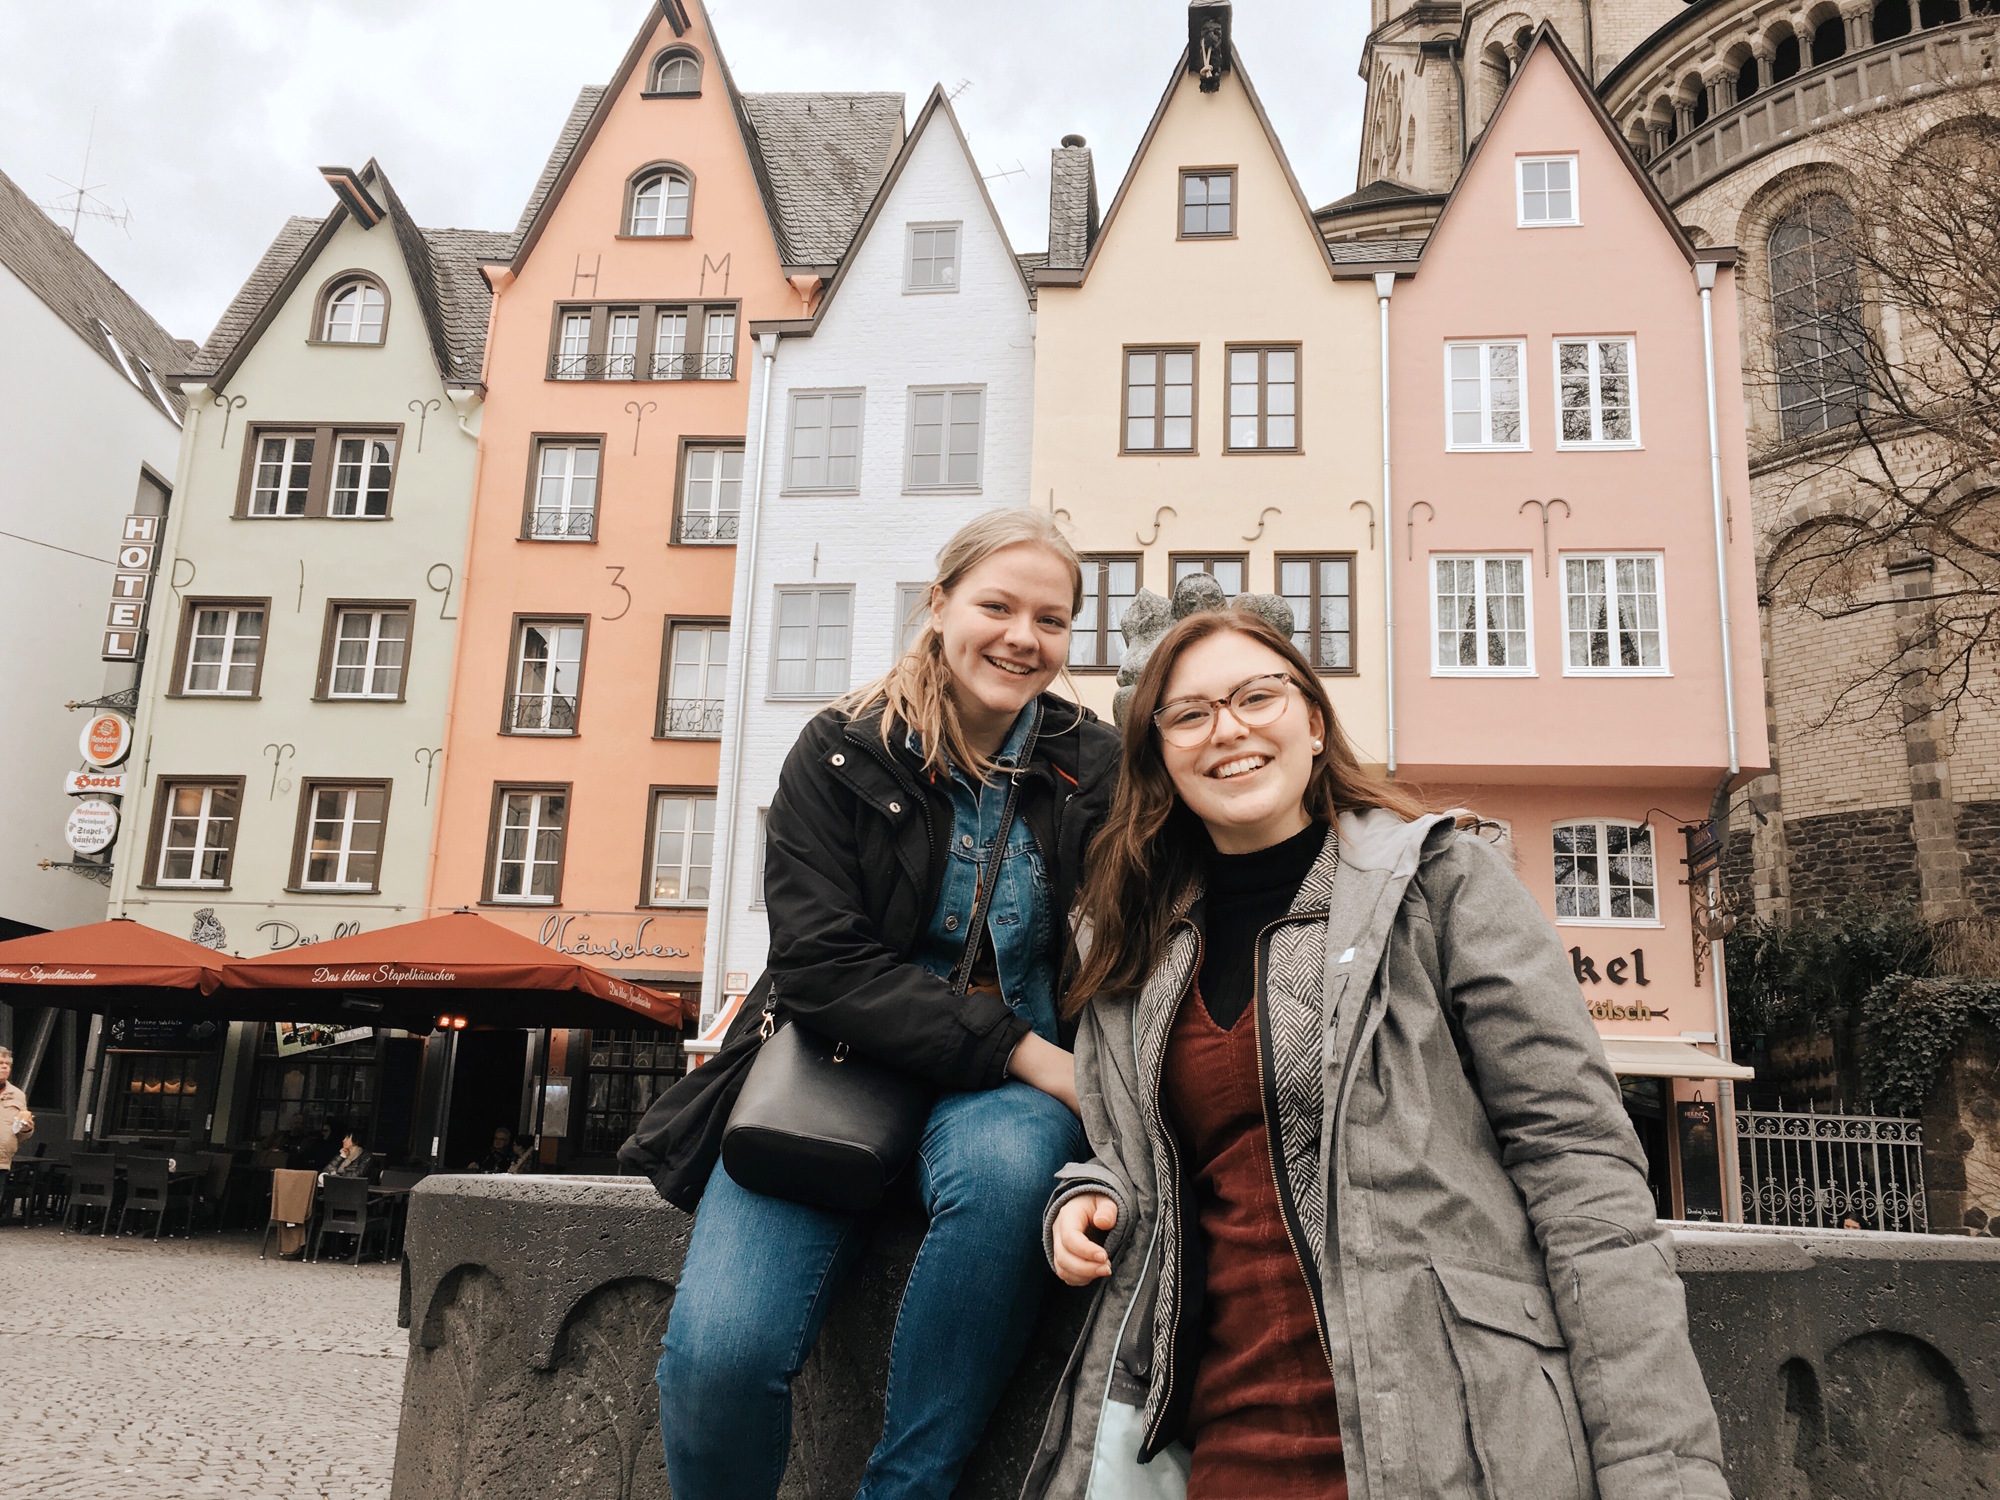 Marli Watson, left, and Julia Oborna, another CBYX American exchange student, attended a concert in Cologne. The Fischmarkt stands behind them.